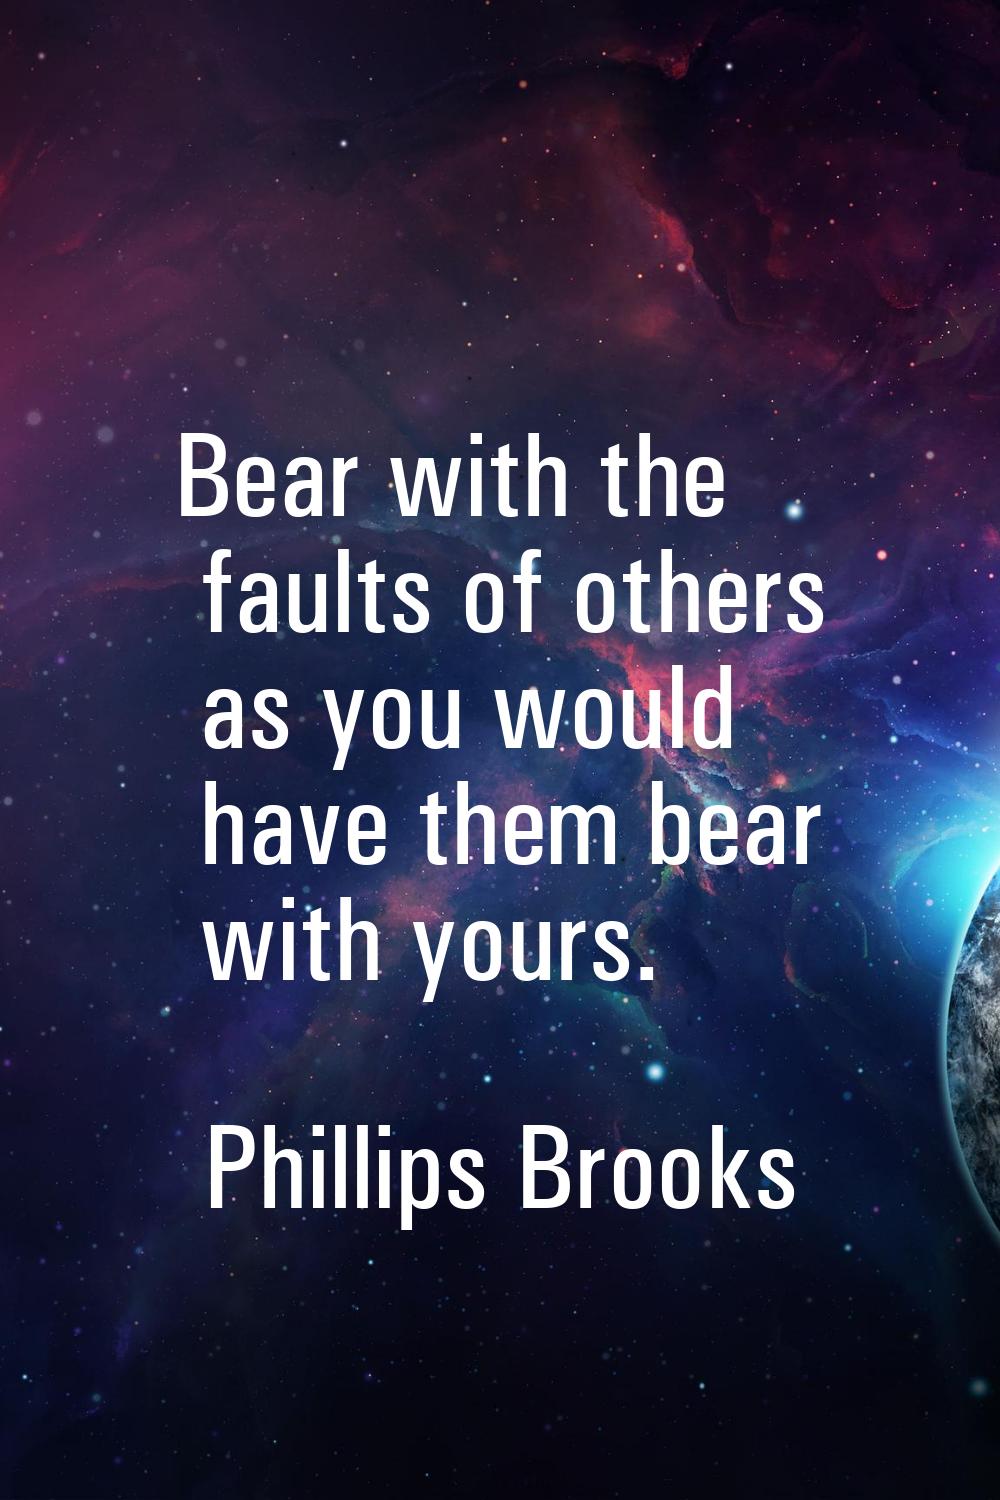 Bear with the faults of others as you would have them bear with yours.